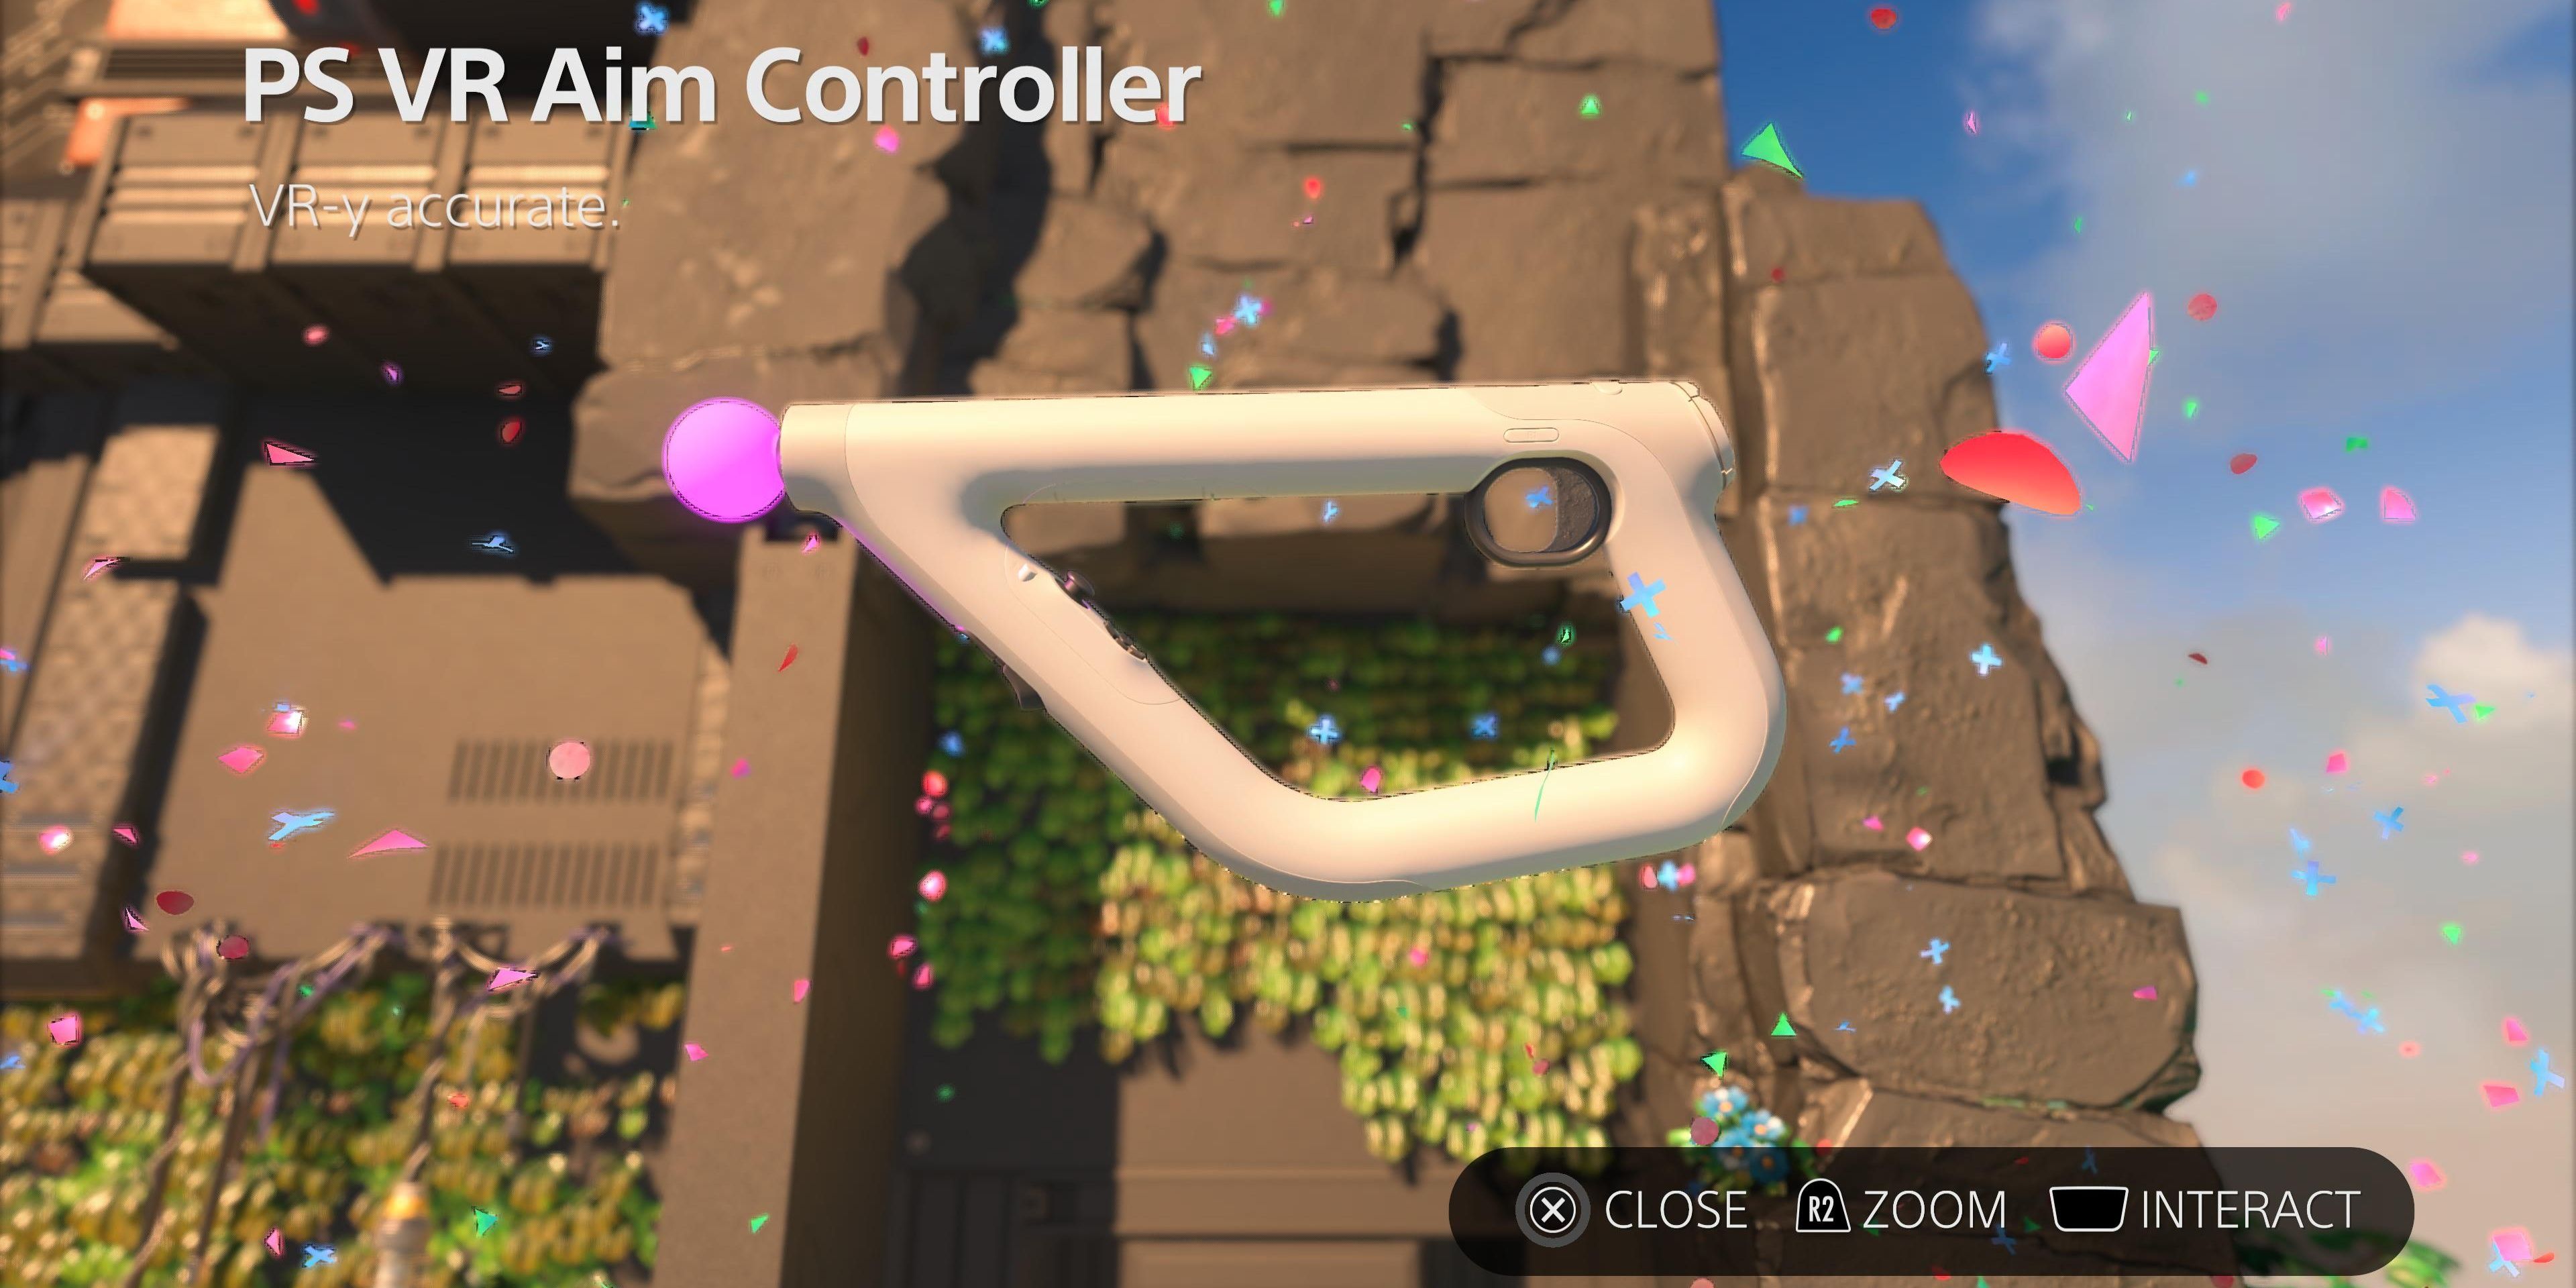 astro finding ps vr aim controller artifact